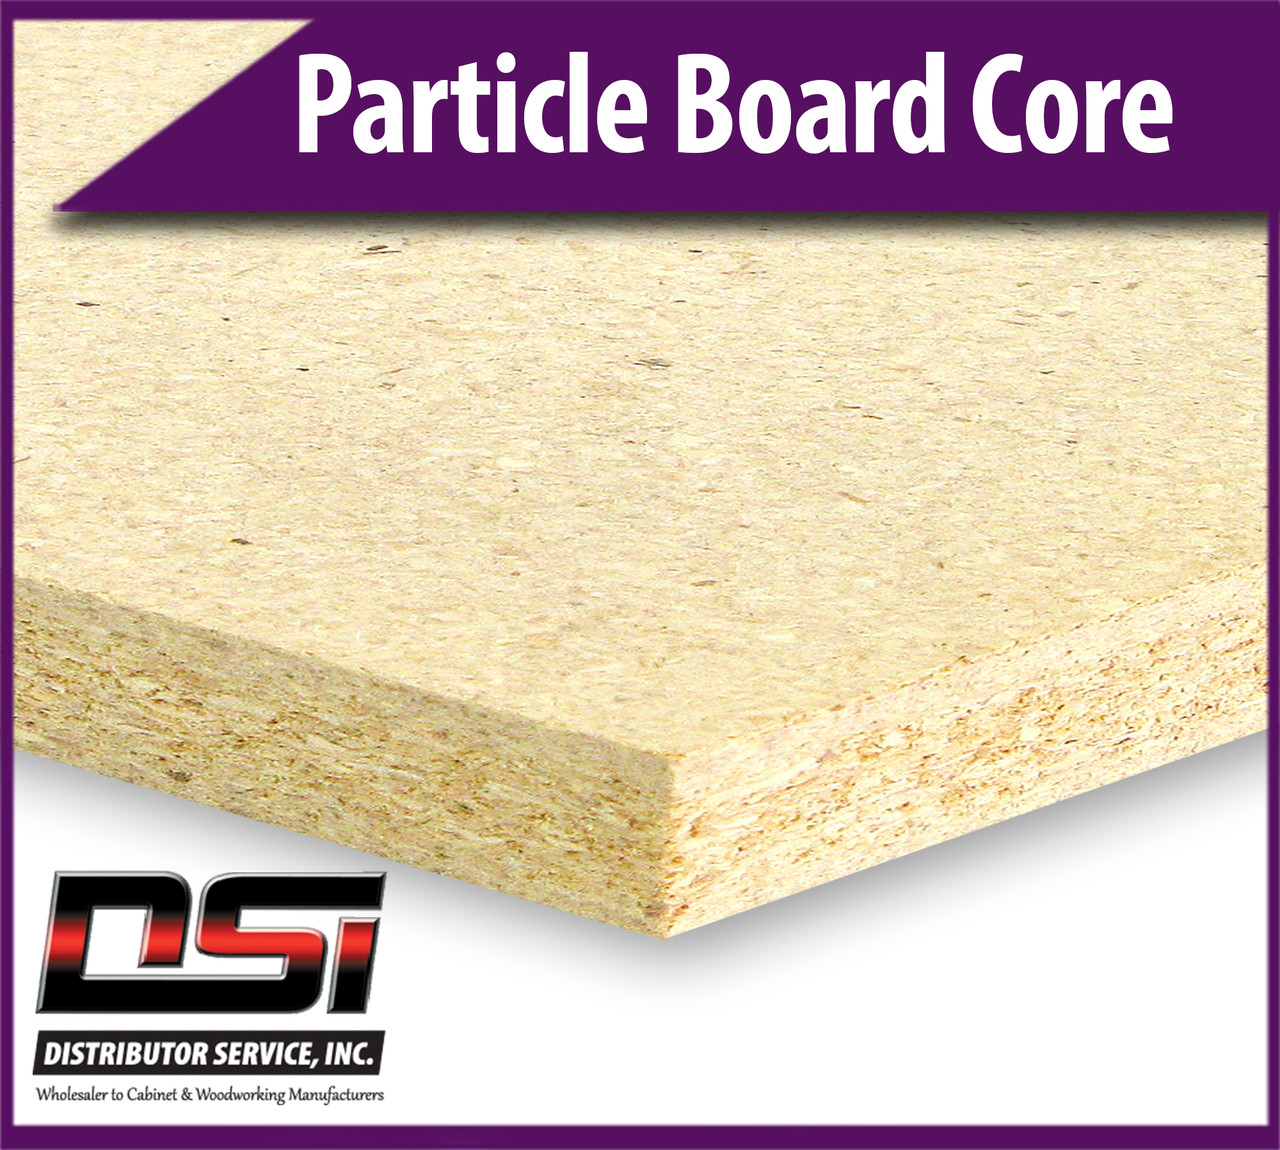 Particle Board Core 3/4" x 30" x 97" Industrial Particleboard Panels